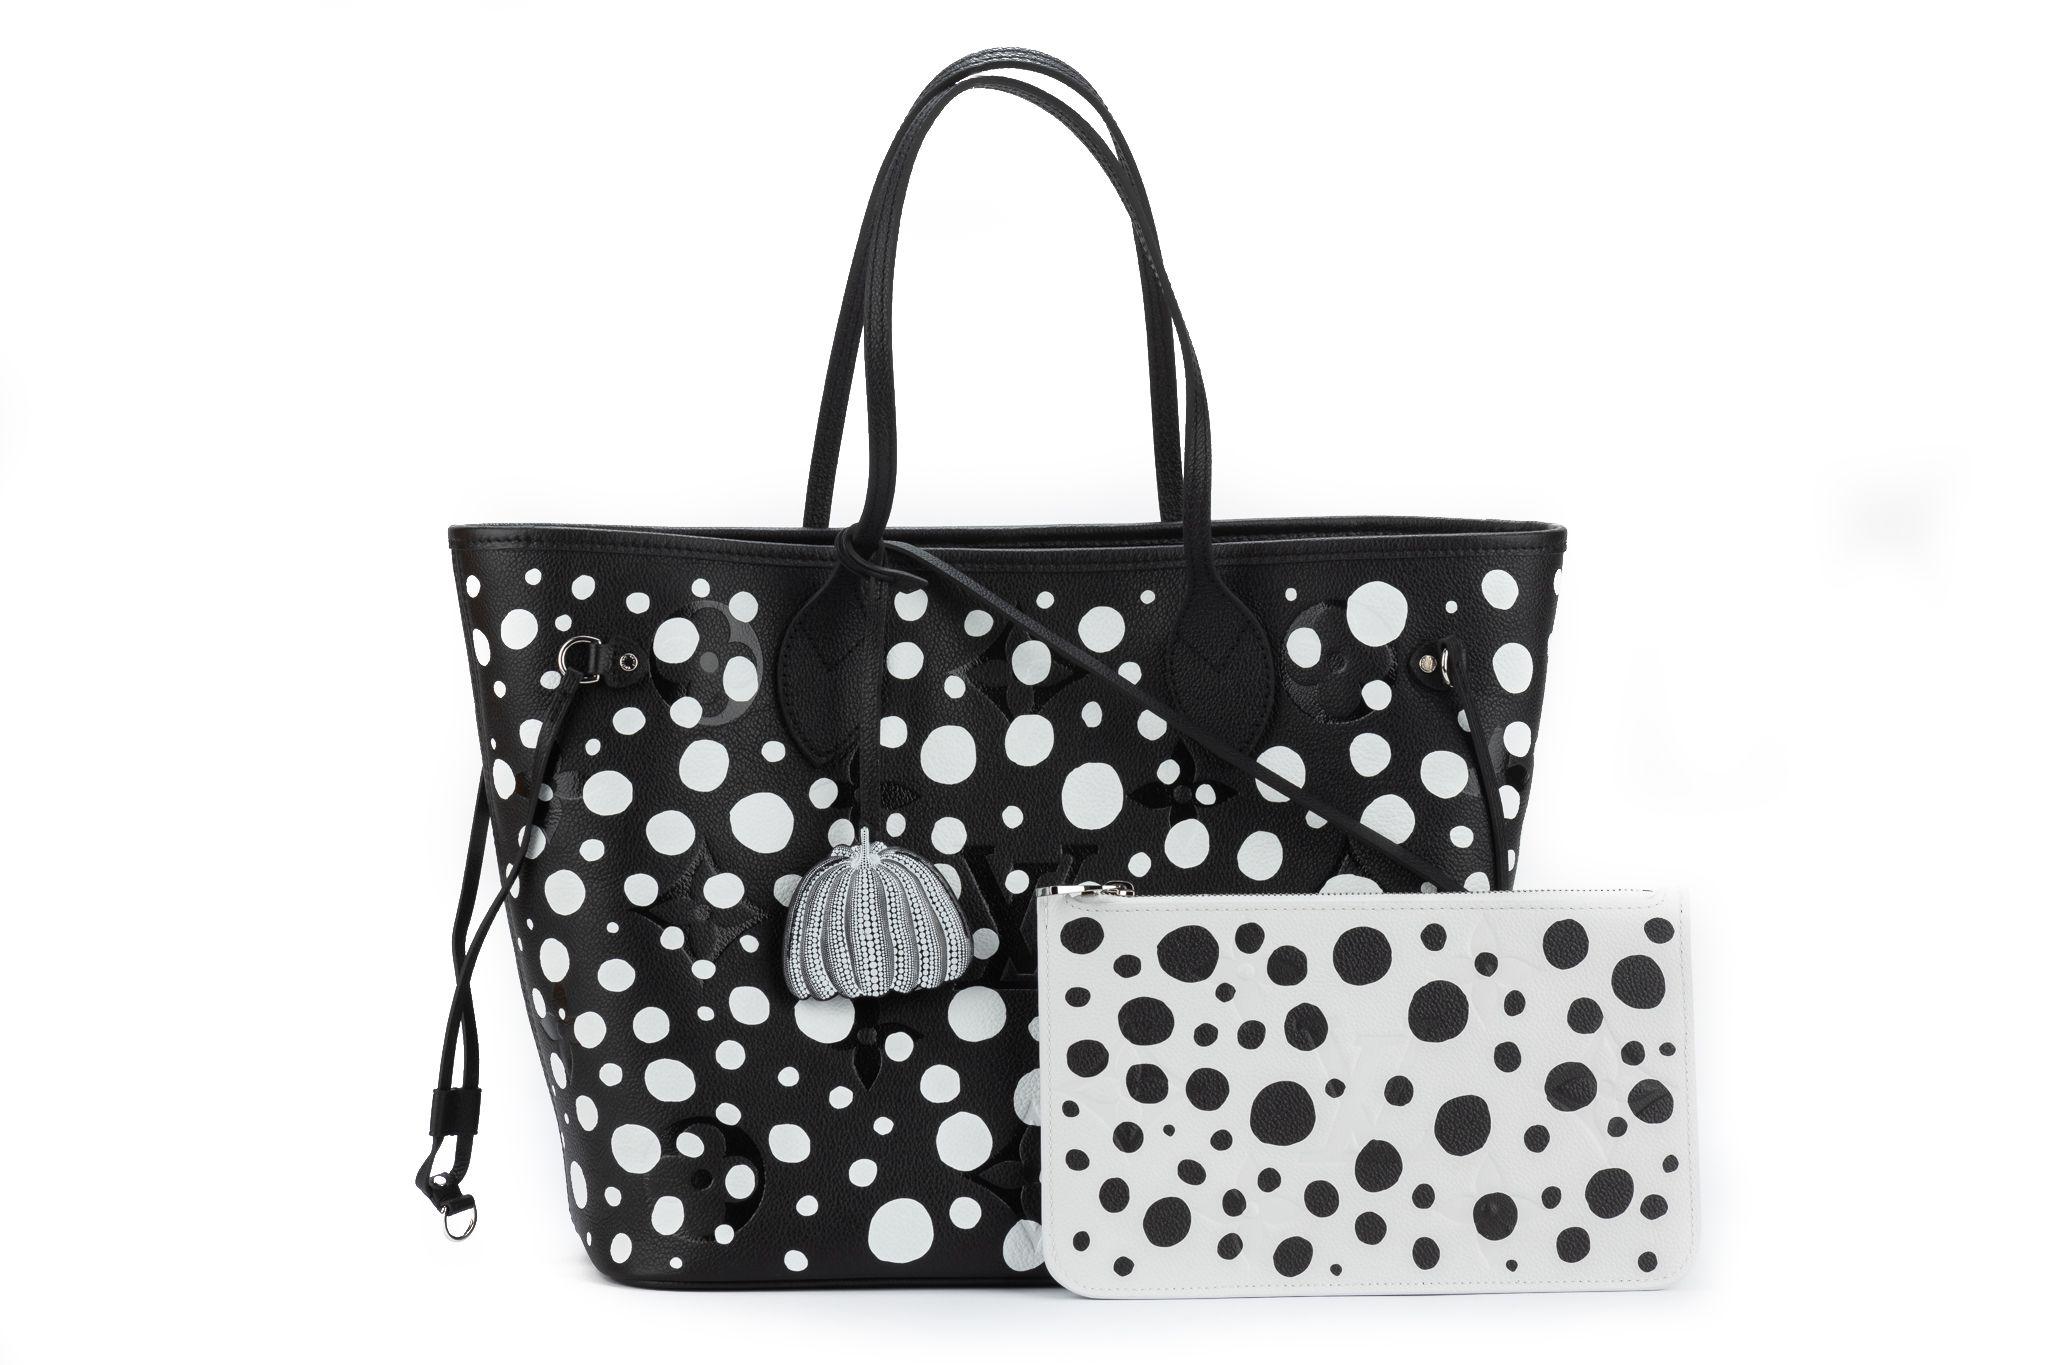 Louis Vuitton x Yayoi Kusama Neverfull in black and white. The bag features a galaxy of white dots on lustrous black Monogram Empreinte cowhide. Brand new and comes with the original dustcover and box.